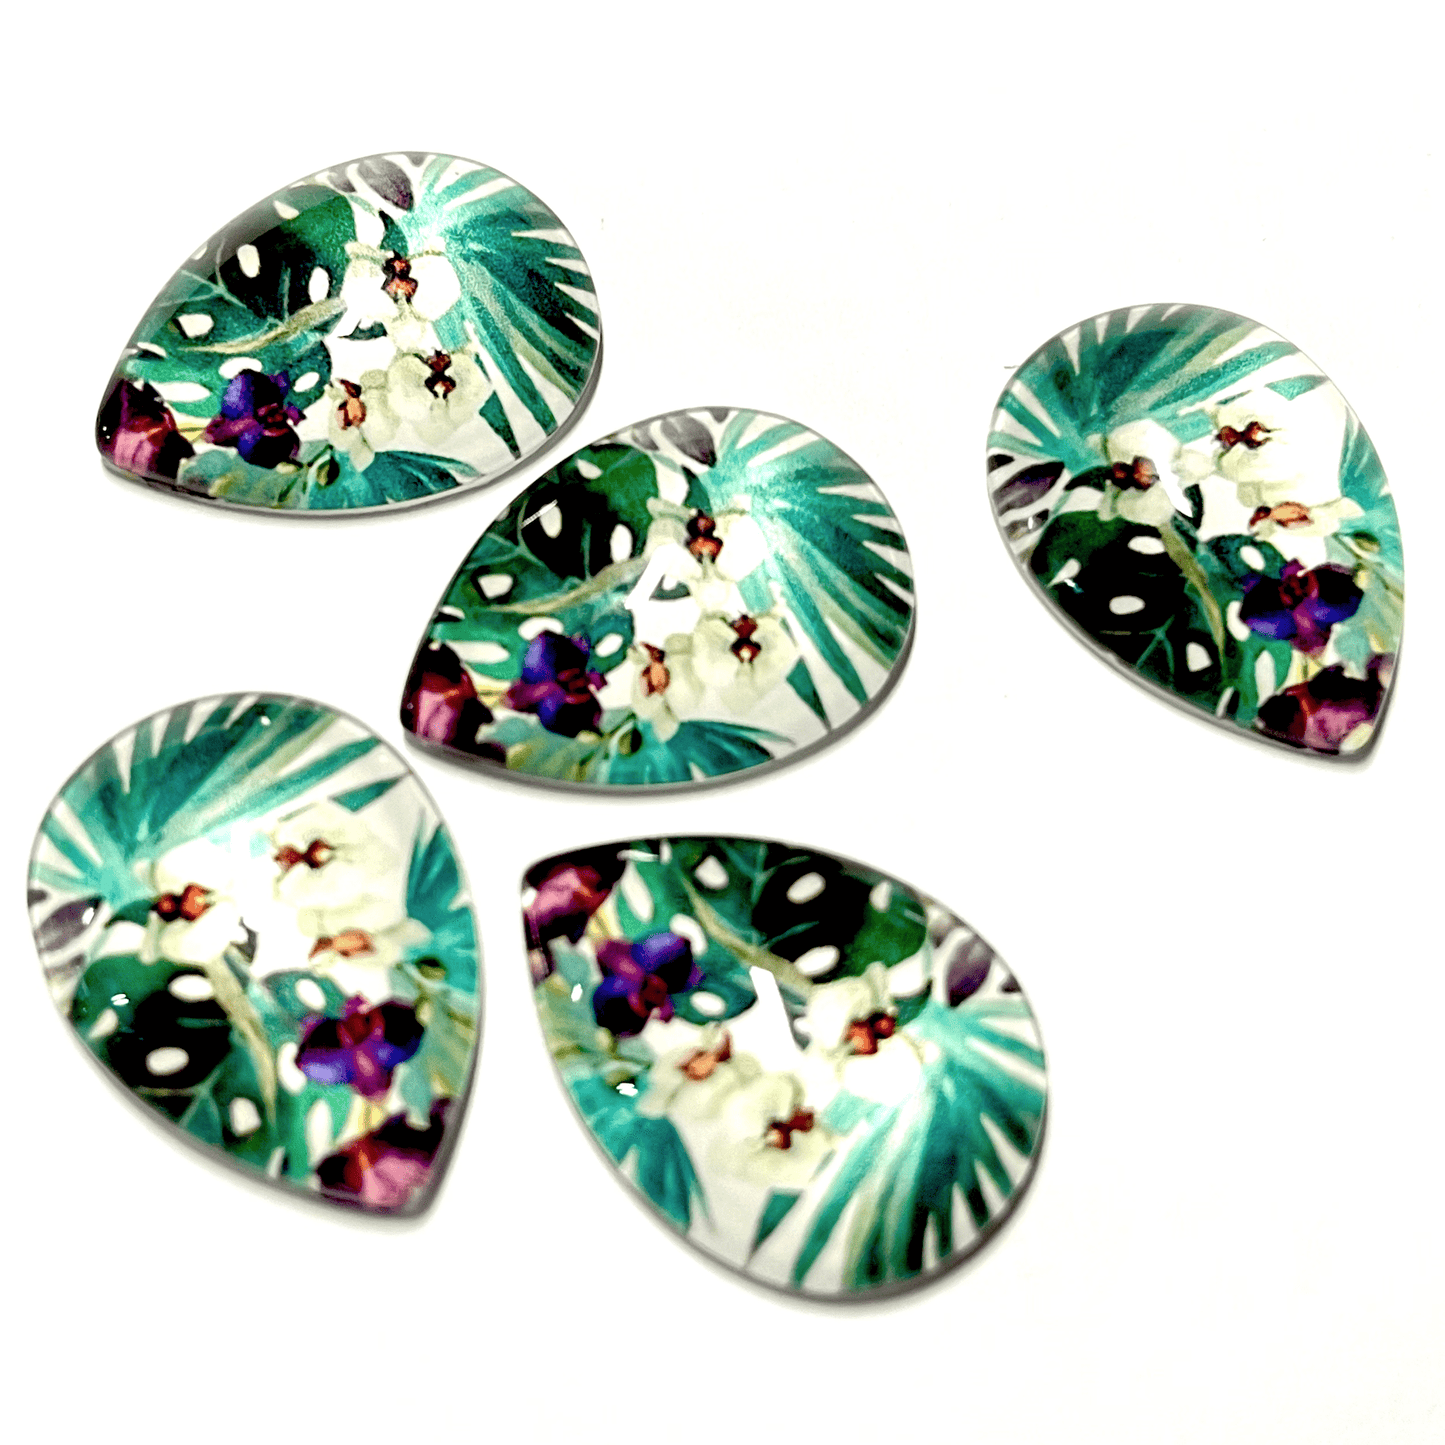 Sundaylace Creations & Bling Resin Gems 18*25mm Teal tropical leaves with purple and white flowers, Glue on, Acrylic Resin Gem